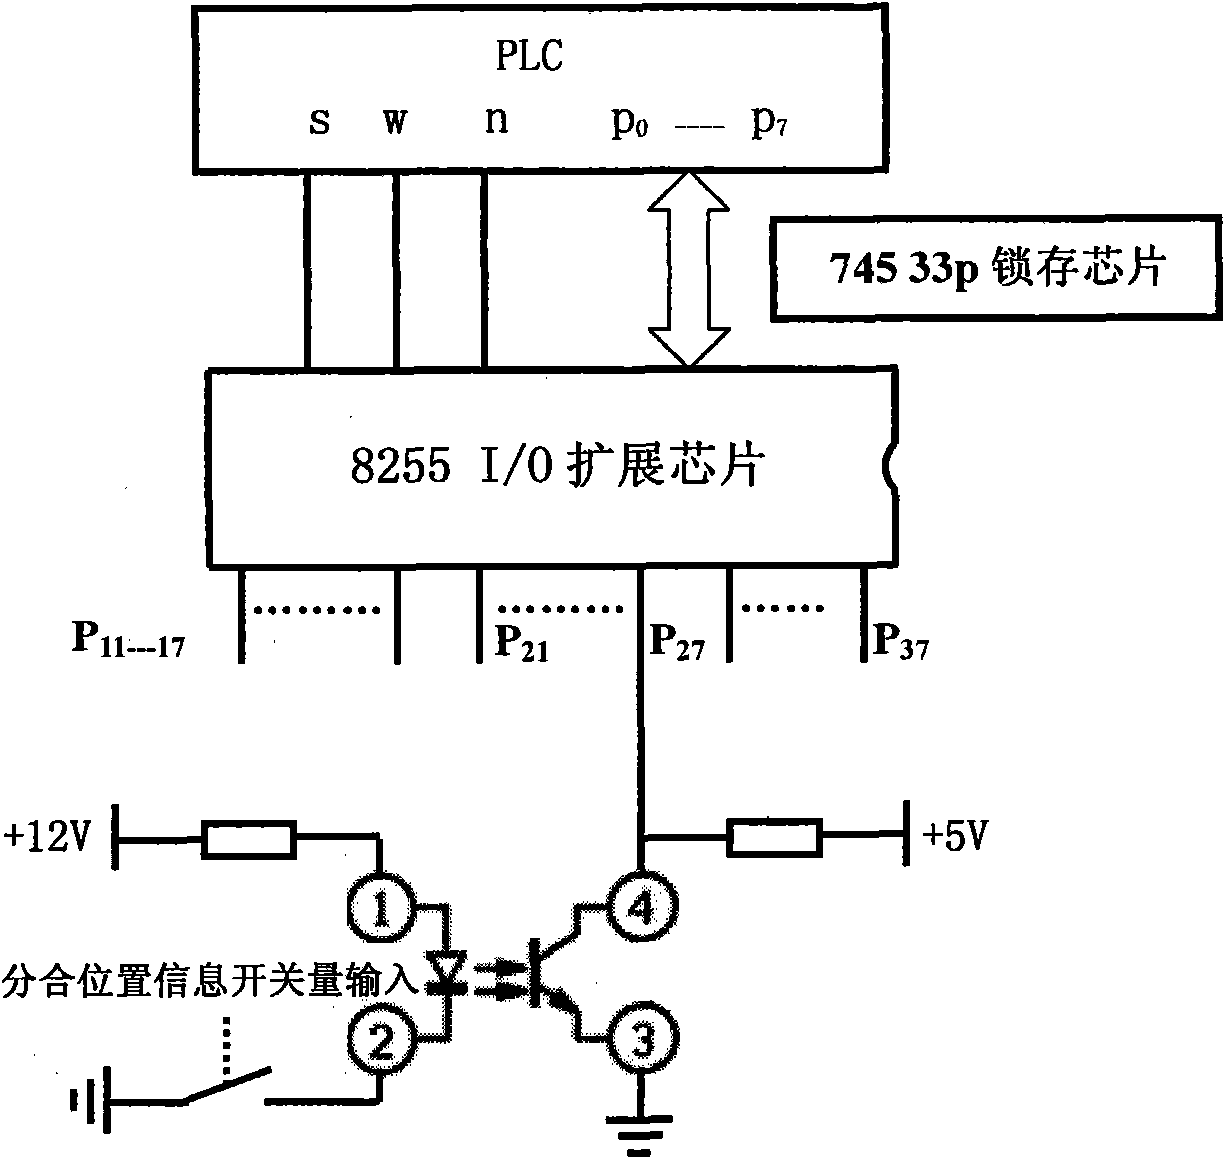 Low-voltage alternating current power supply programmable switching system of substation